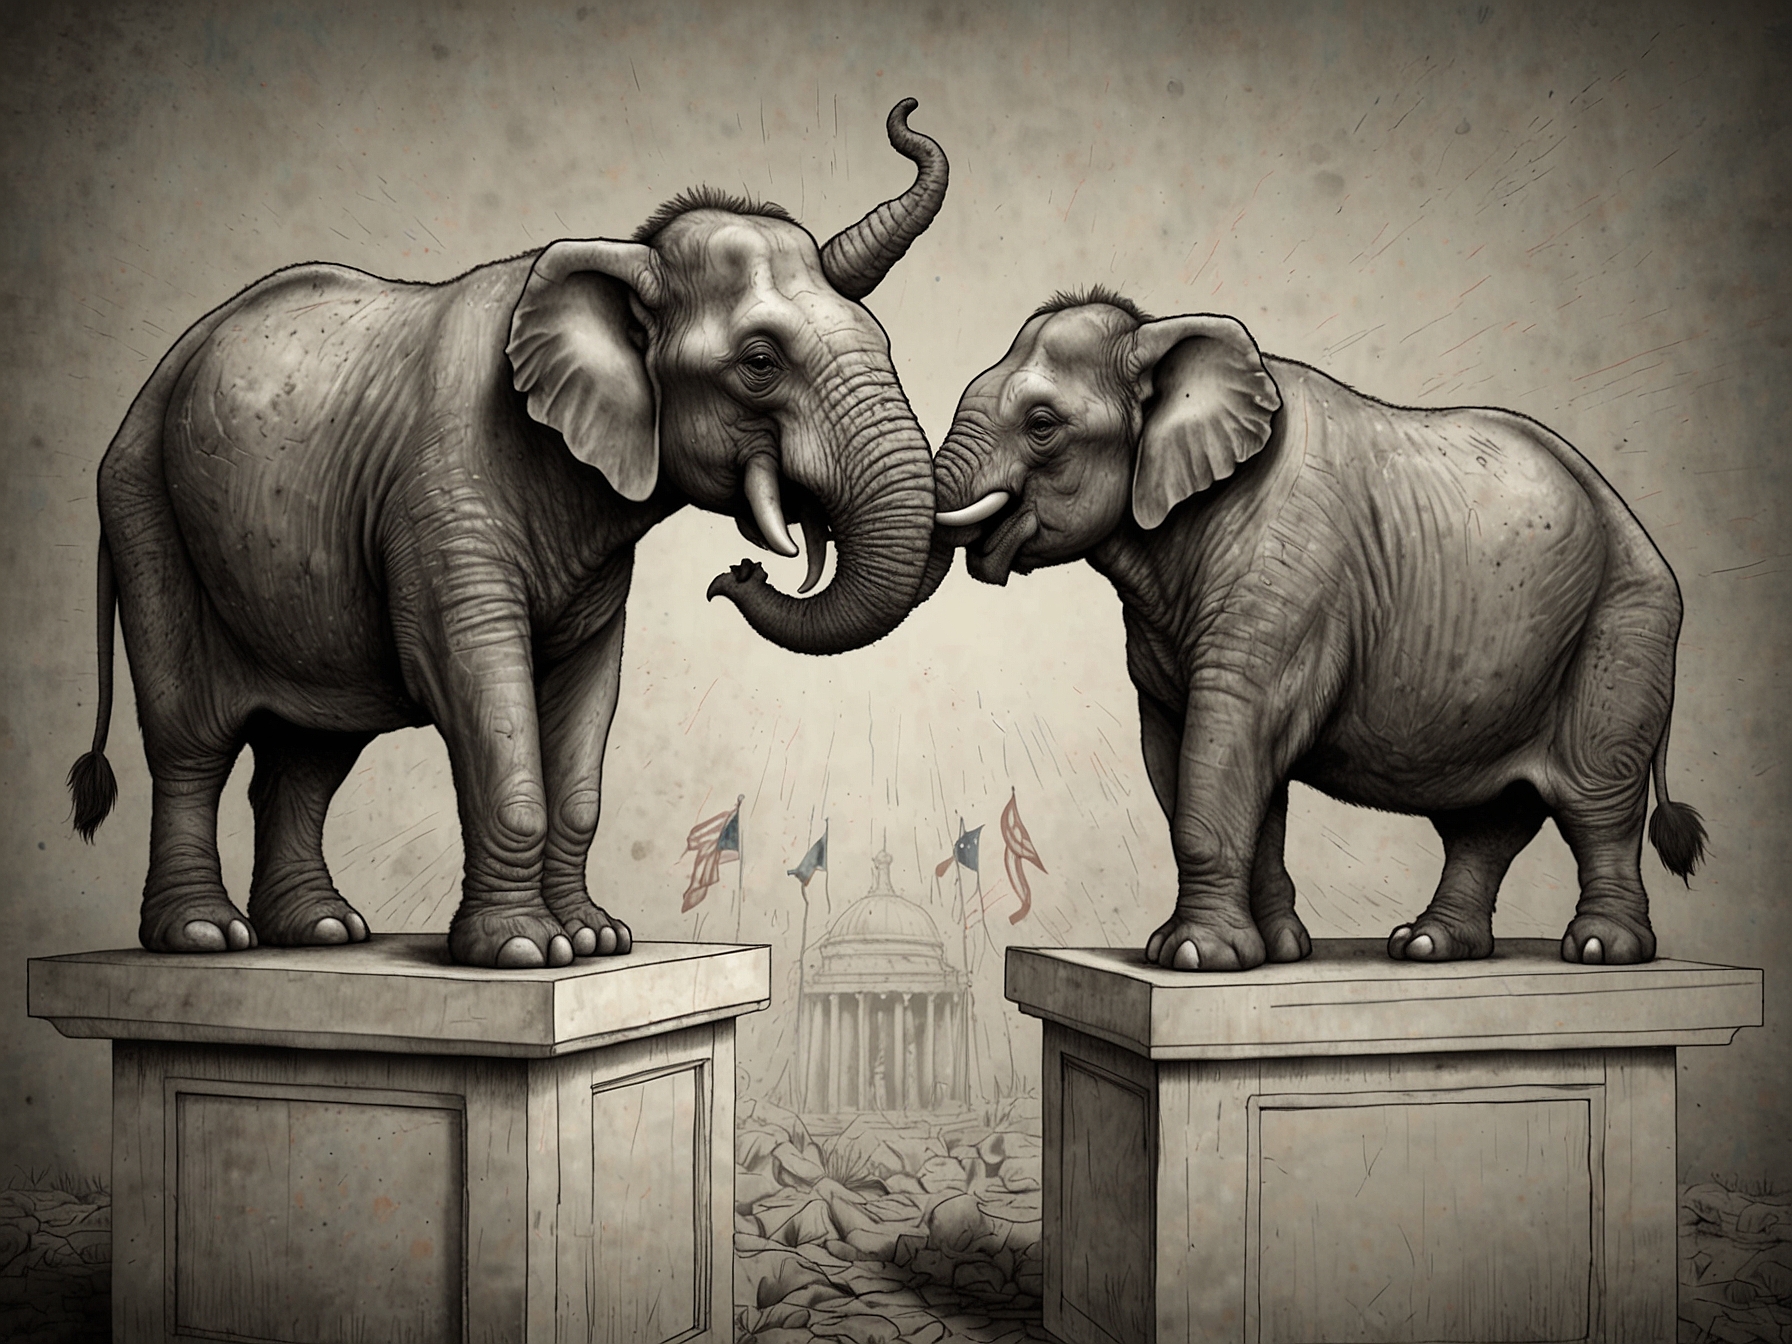 An image illustrating the contrasting ideologies of the Republican and Democratic parties, featuring symbols like the GOP elephant and Democratic donkey, to highlight the debate on government intervention and personal freedom.